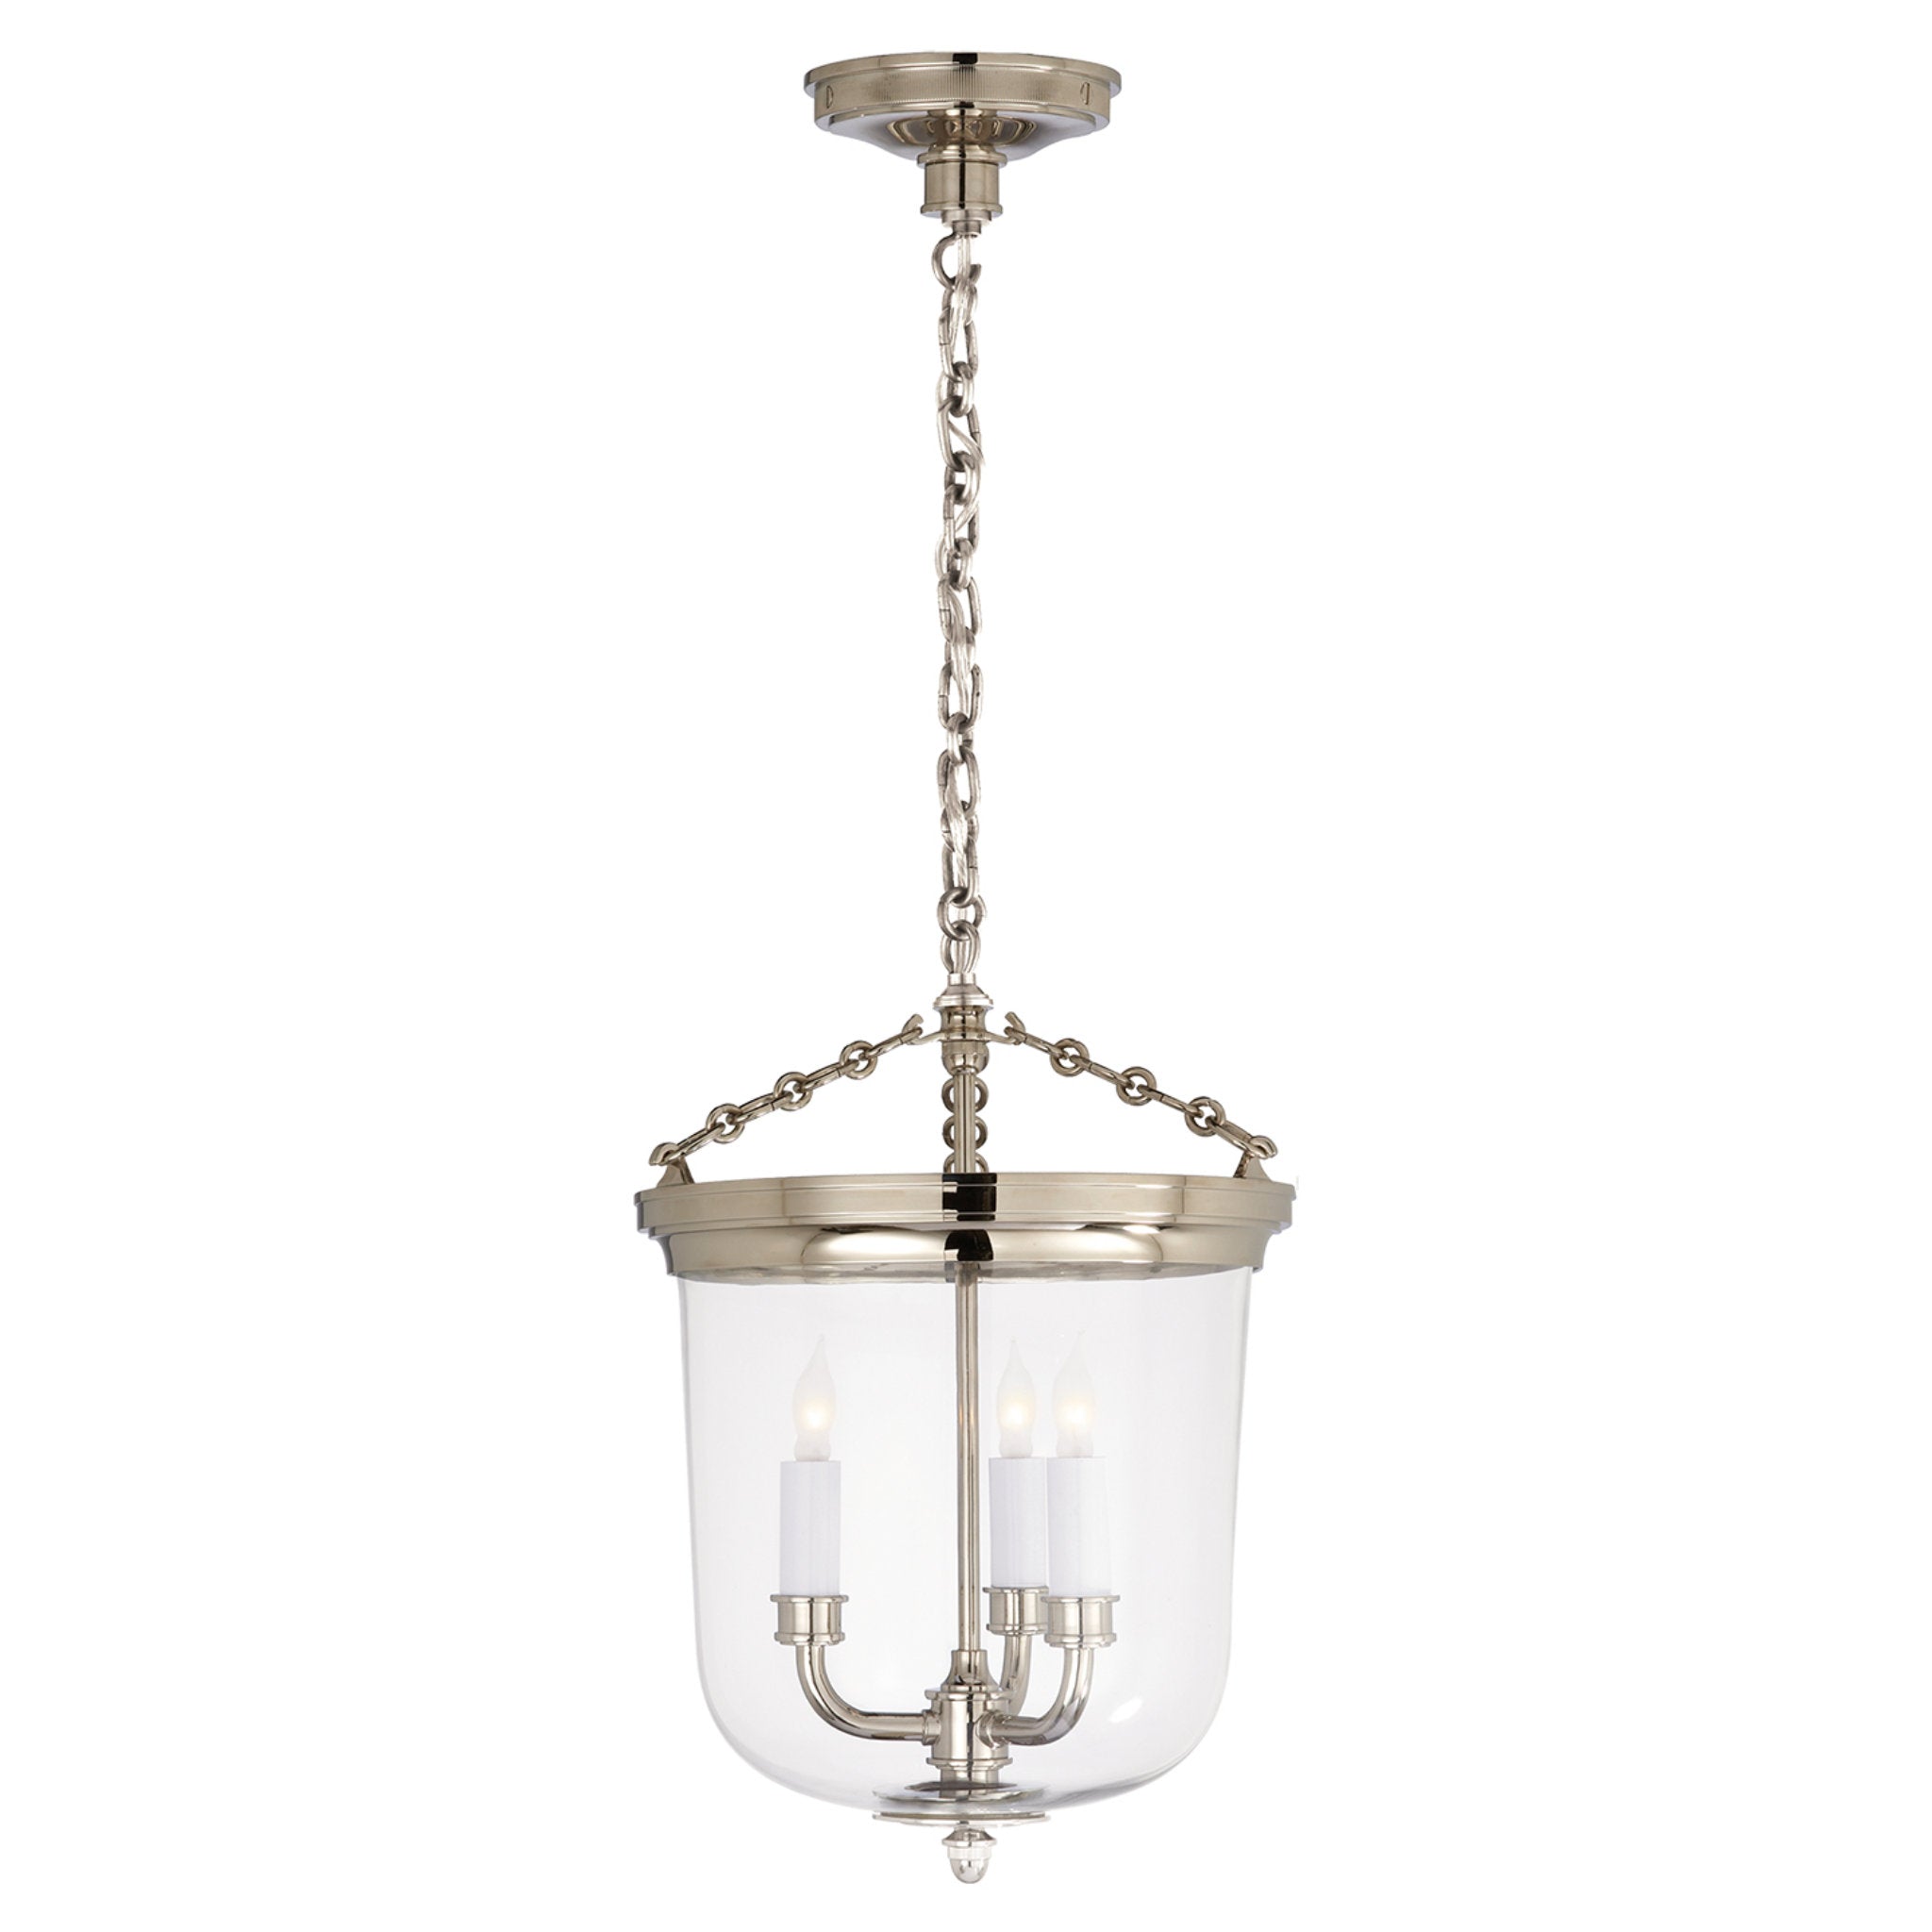 Thomas O'Brien Merchant Lantern in Polished Nickel with Clear Glass